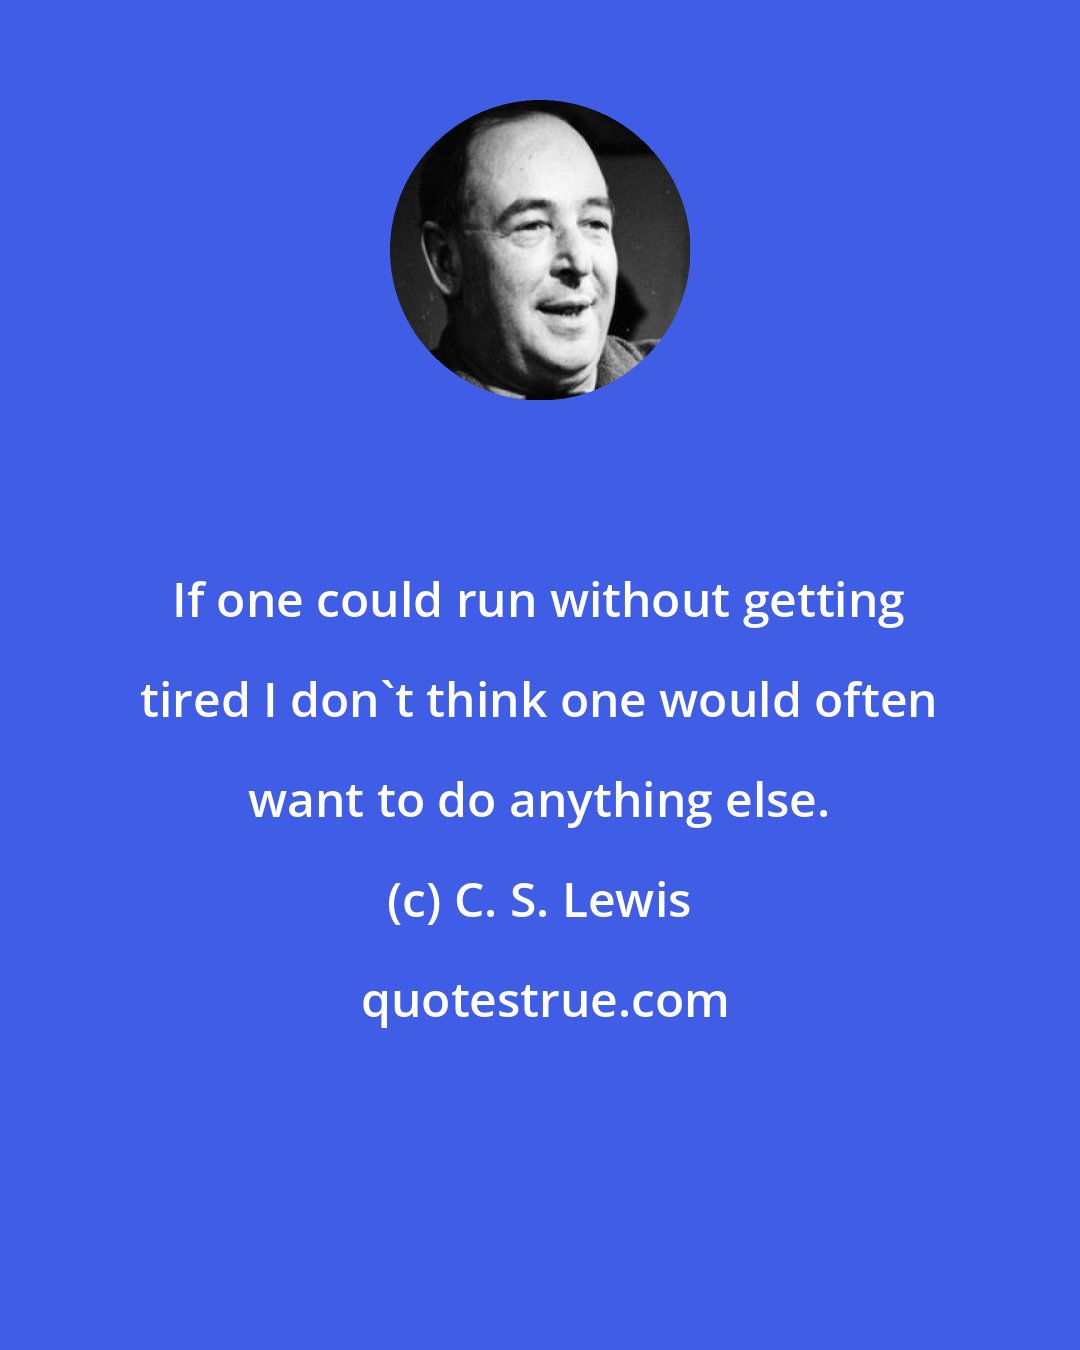 C. S. Lewis: If one could run without getting tired I don't think one would often want to do anything else.